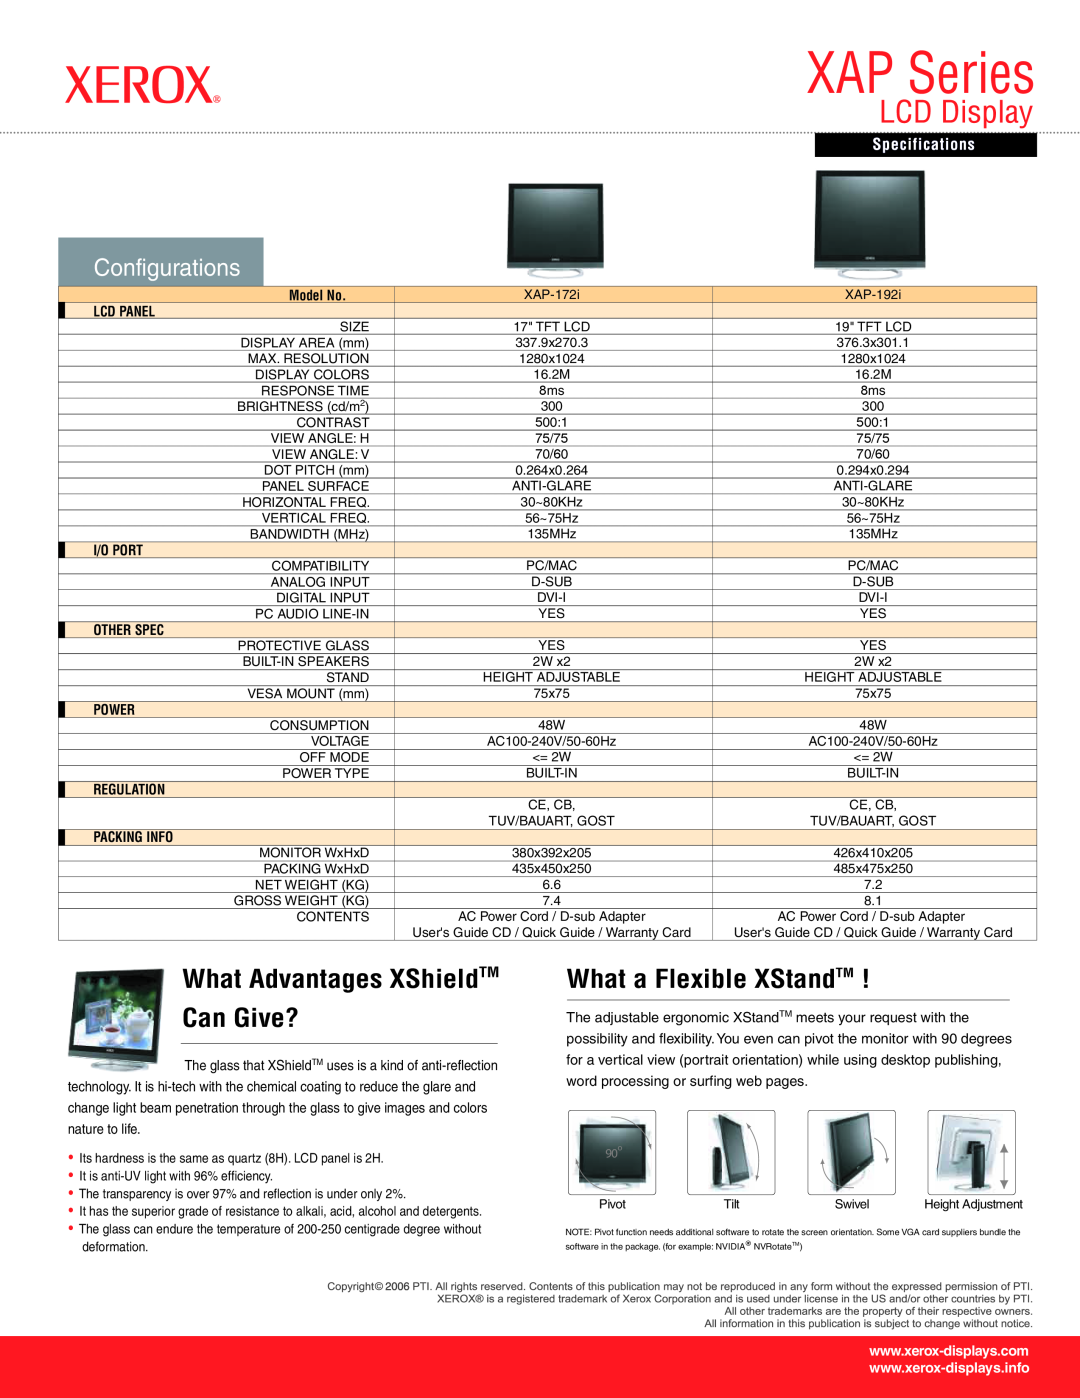 Xerox XAP Series What Advantages XShieldTM Can Give?, What a Flexible XStandTM, Configurations, Model No, Lcd Panel, Power 